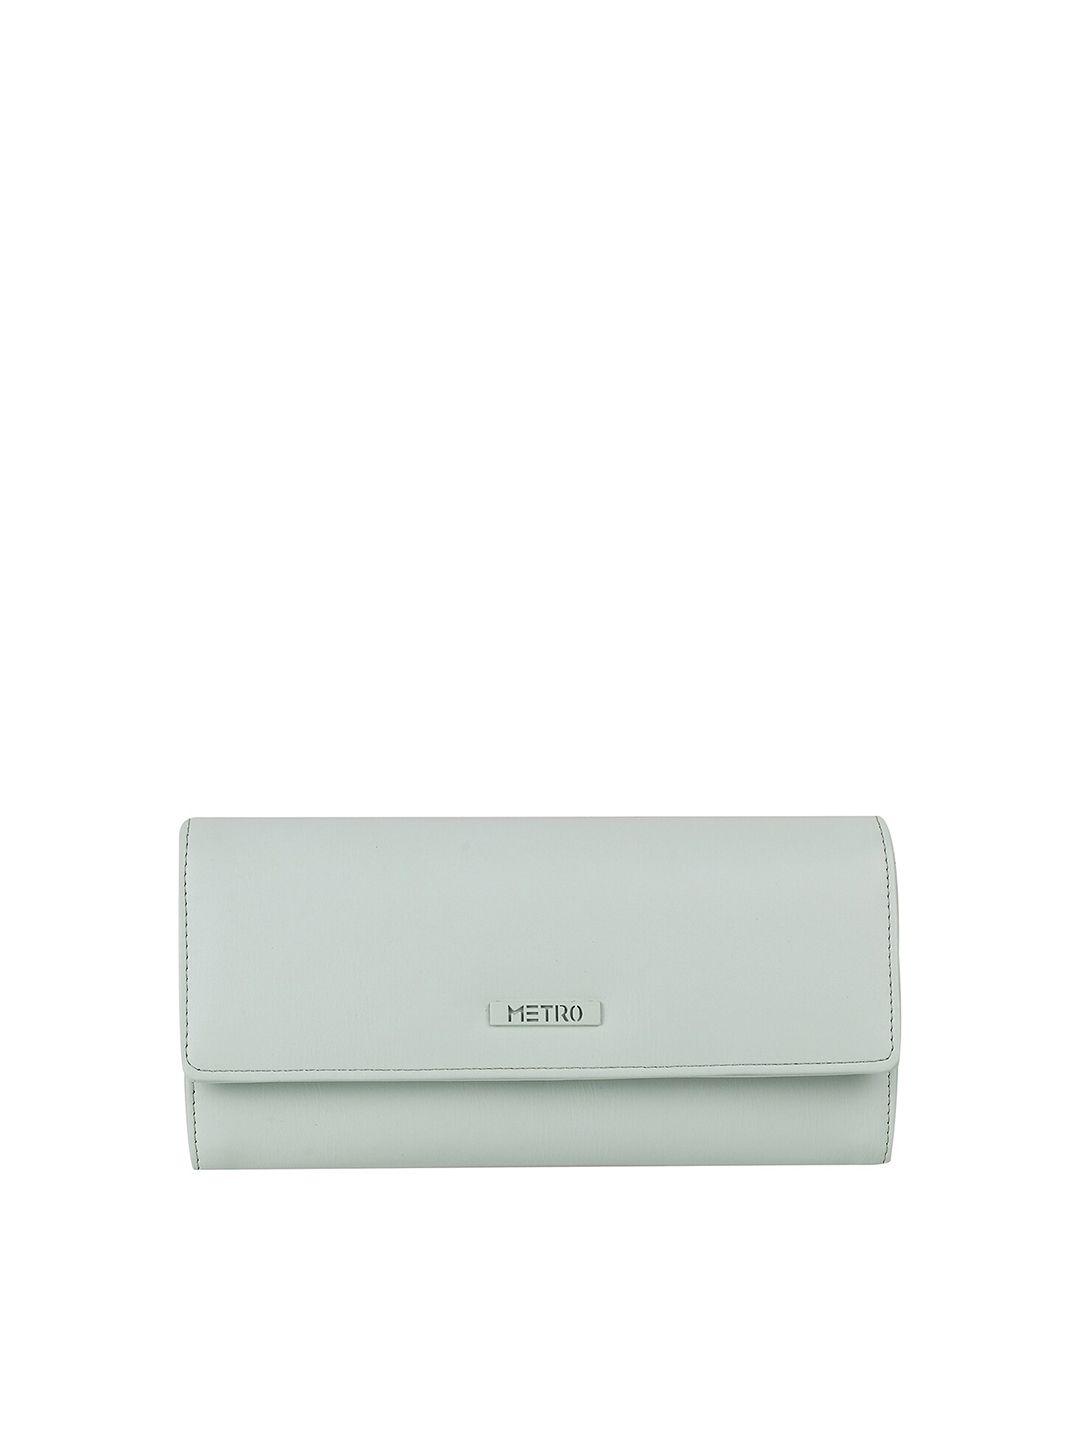 metro women three fold wallet with sd card holder